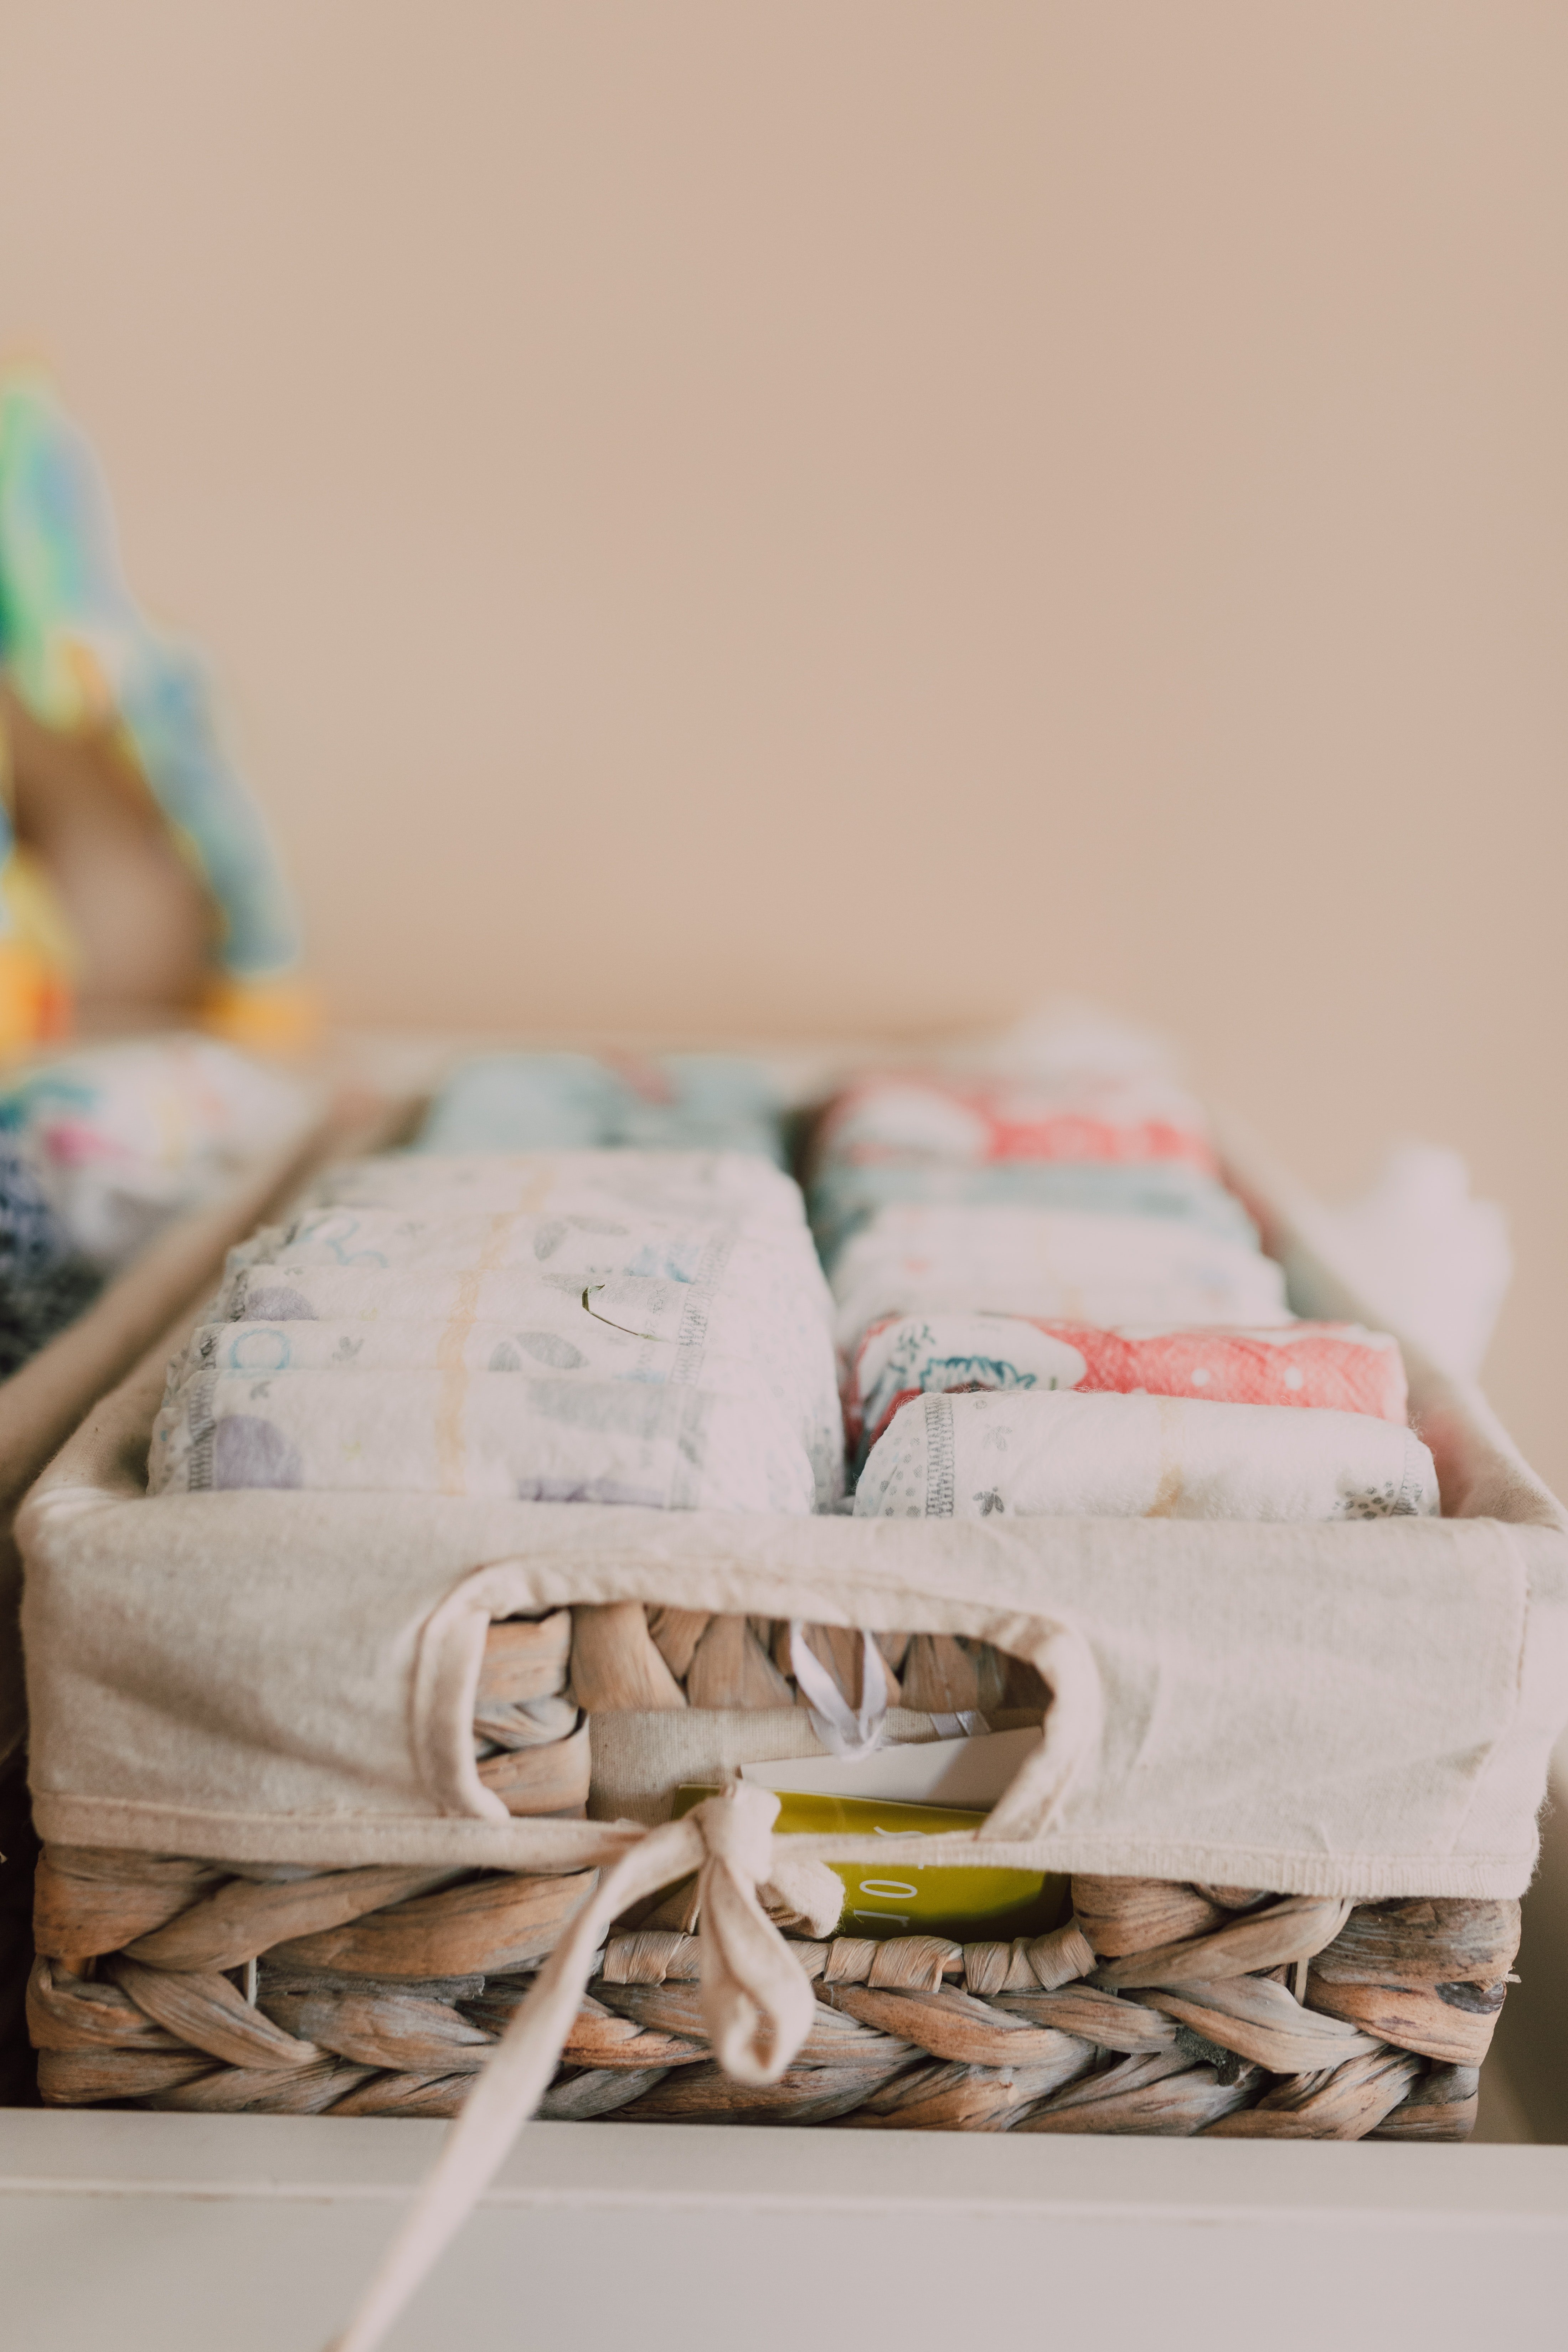 Jenny didn't have enough money to get diapers for Anne. | Source: Pexels